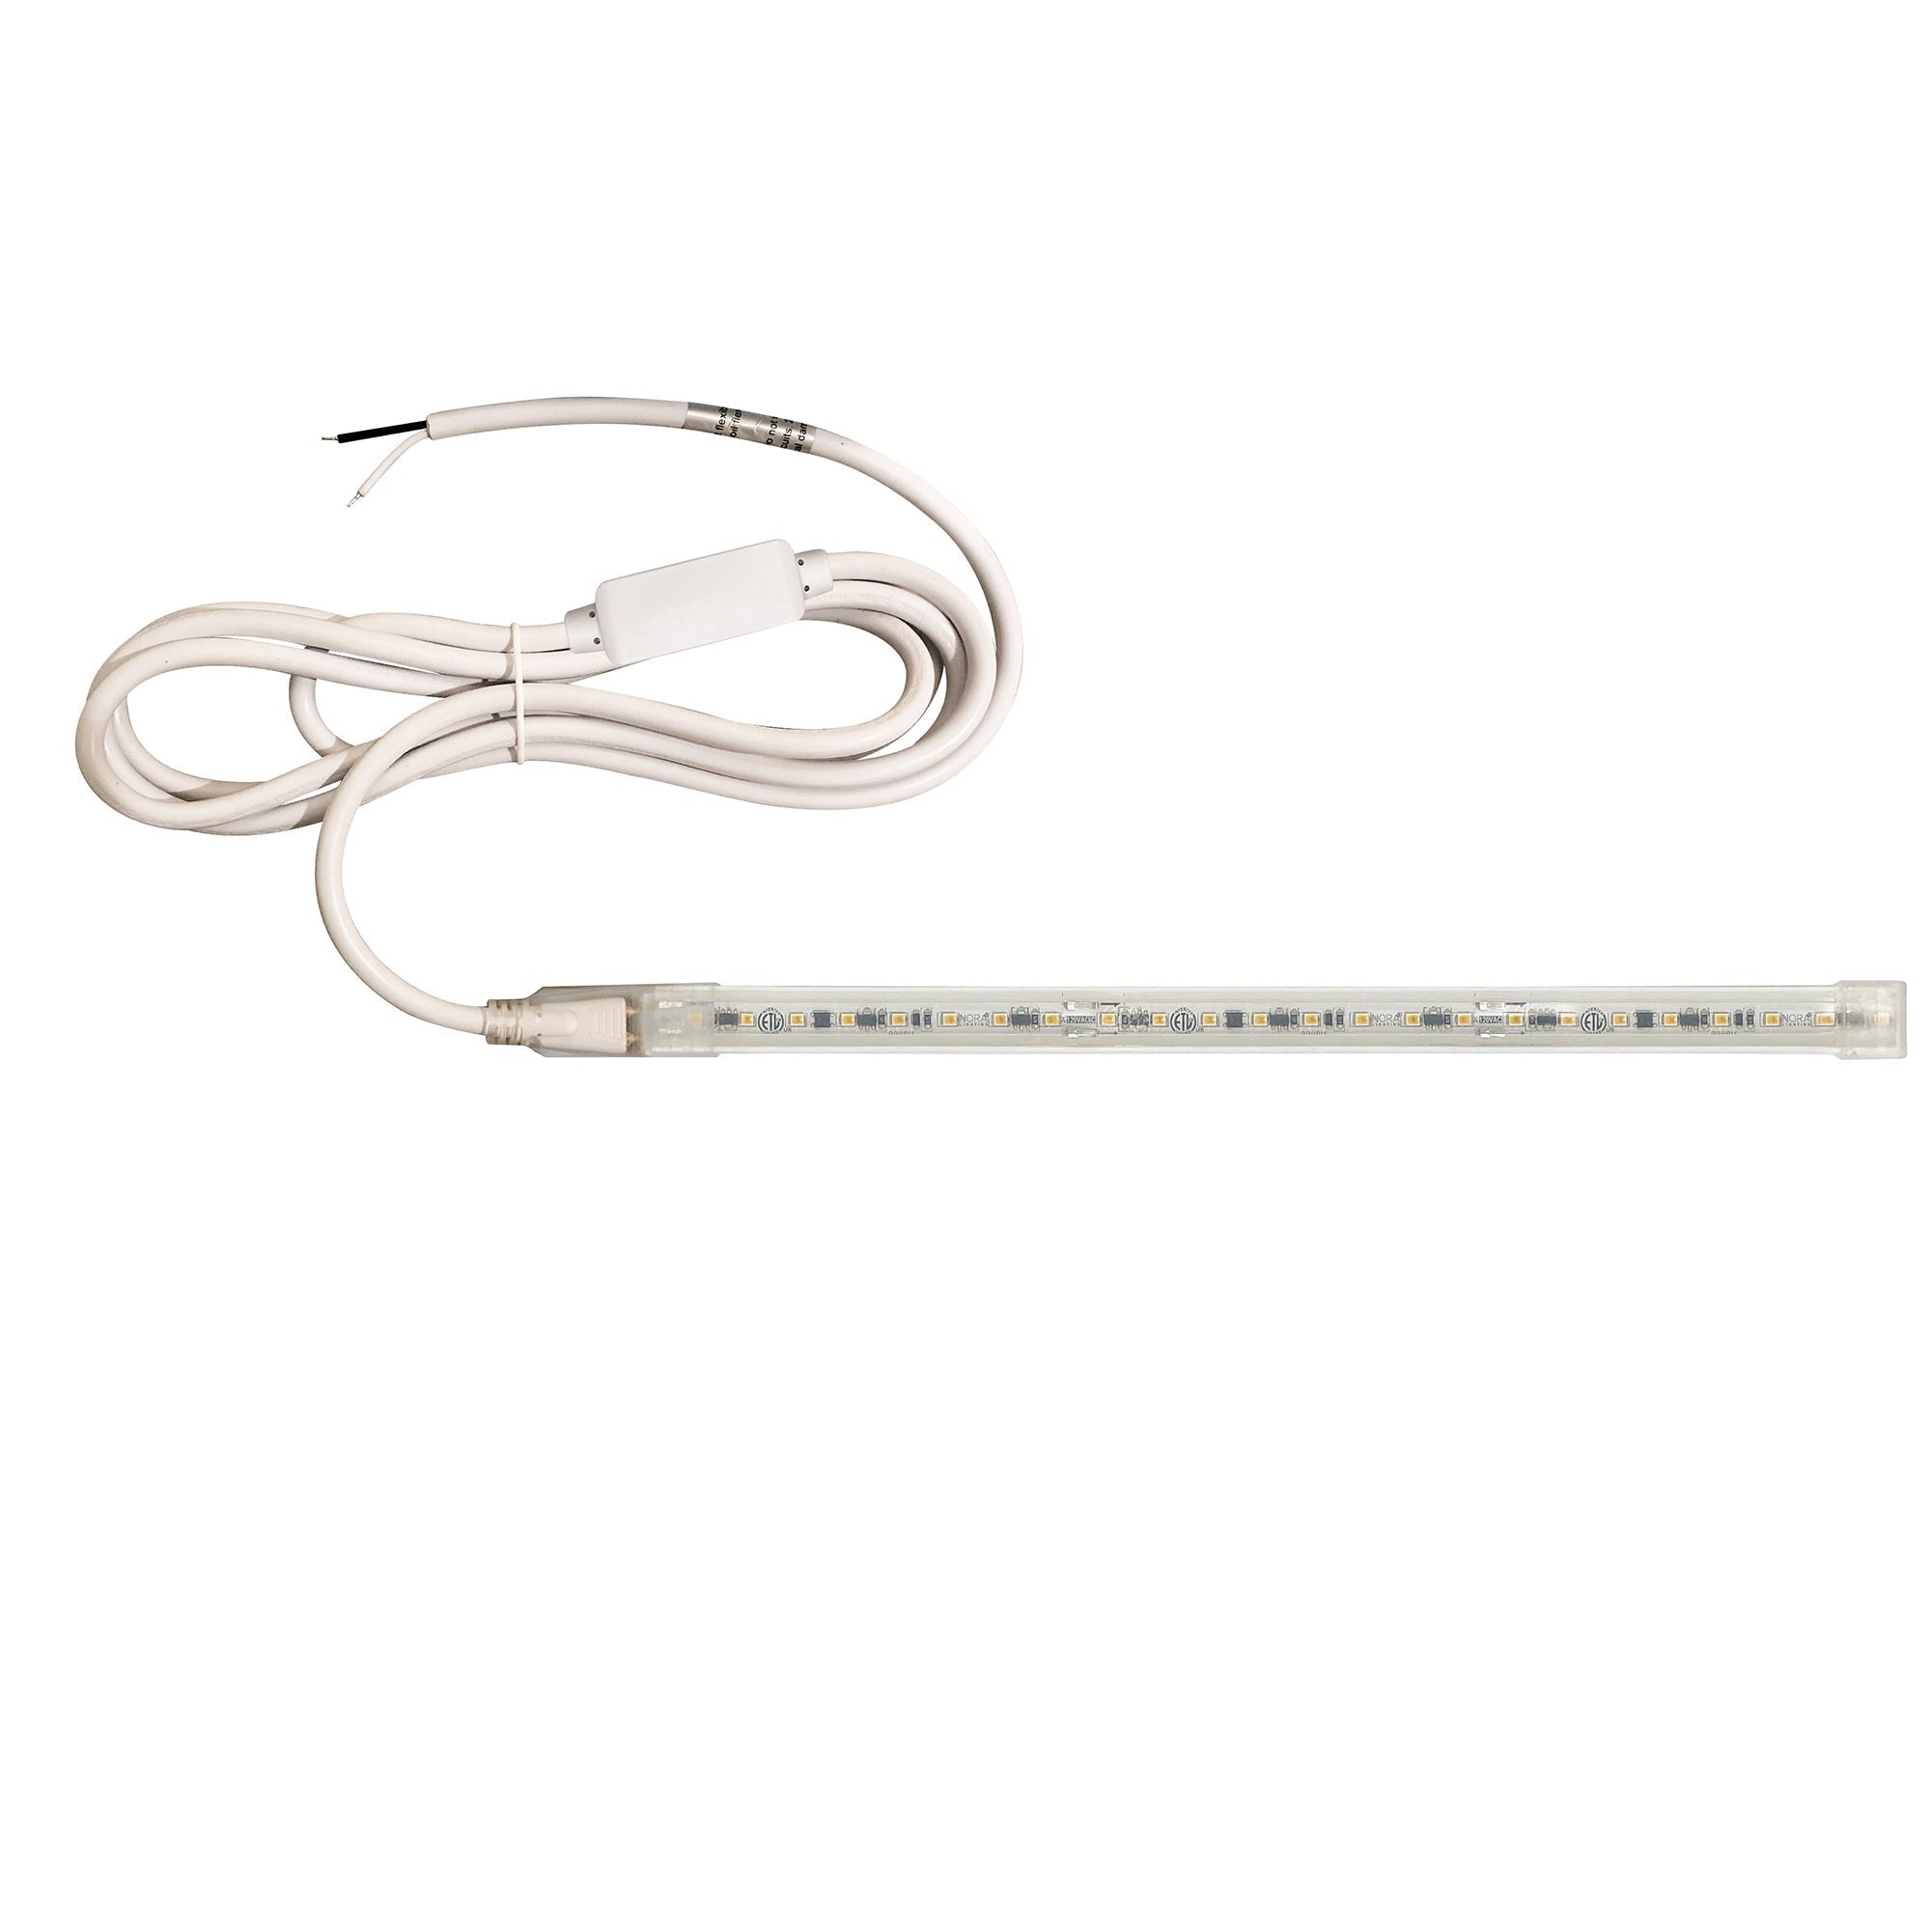 Nora Lighting NUTP13-W69-12-930/HWSP - Accent / Undercabinet - Custom Cut 69-ft 120V Continuous LED Tape Light, 330lm / 3.6W per foot, 3000K, w/ Mounting Clips and 8' Hardwired Power Cord w/ Surge Protector